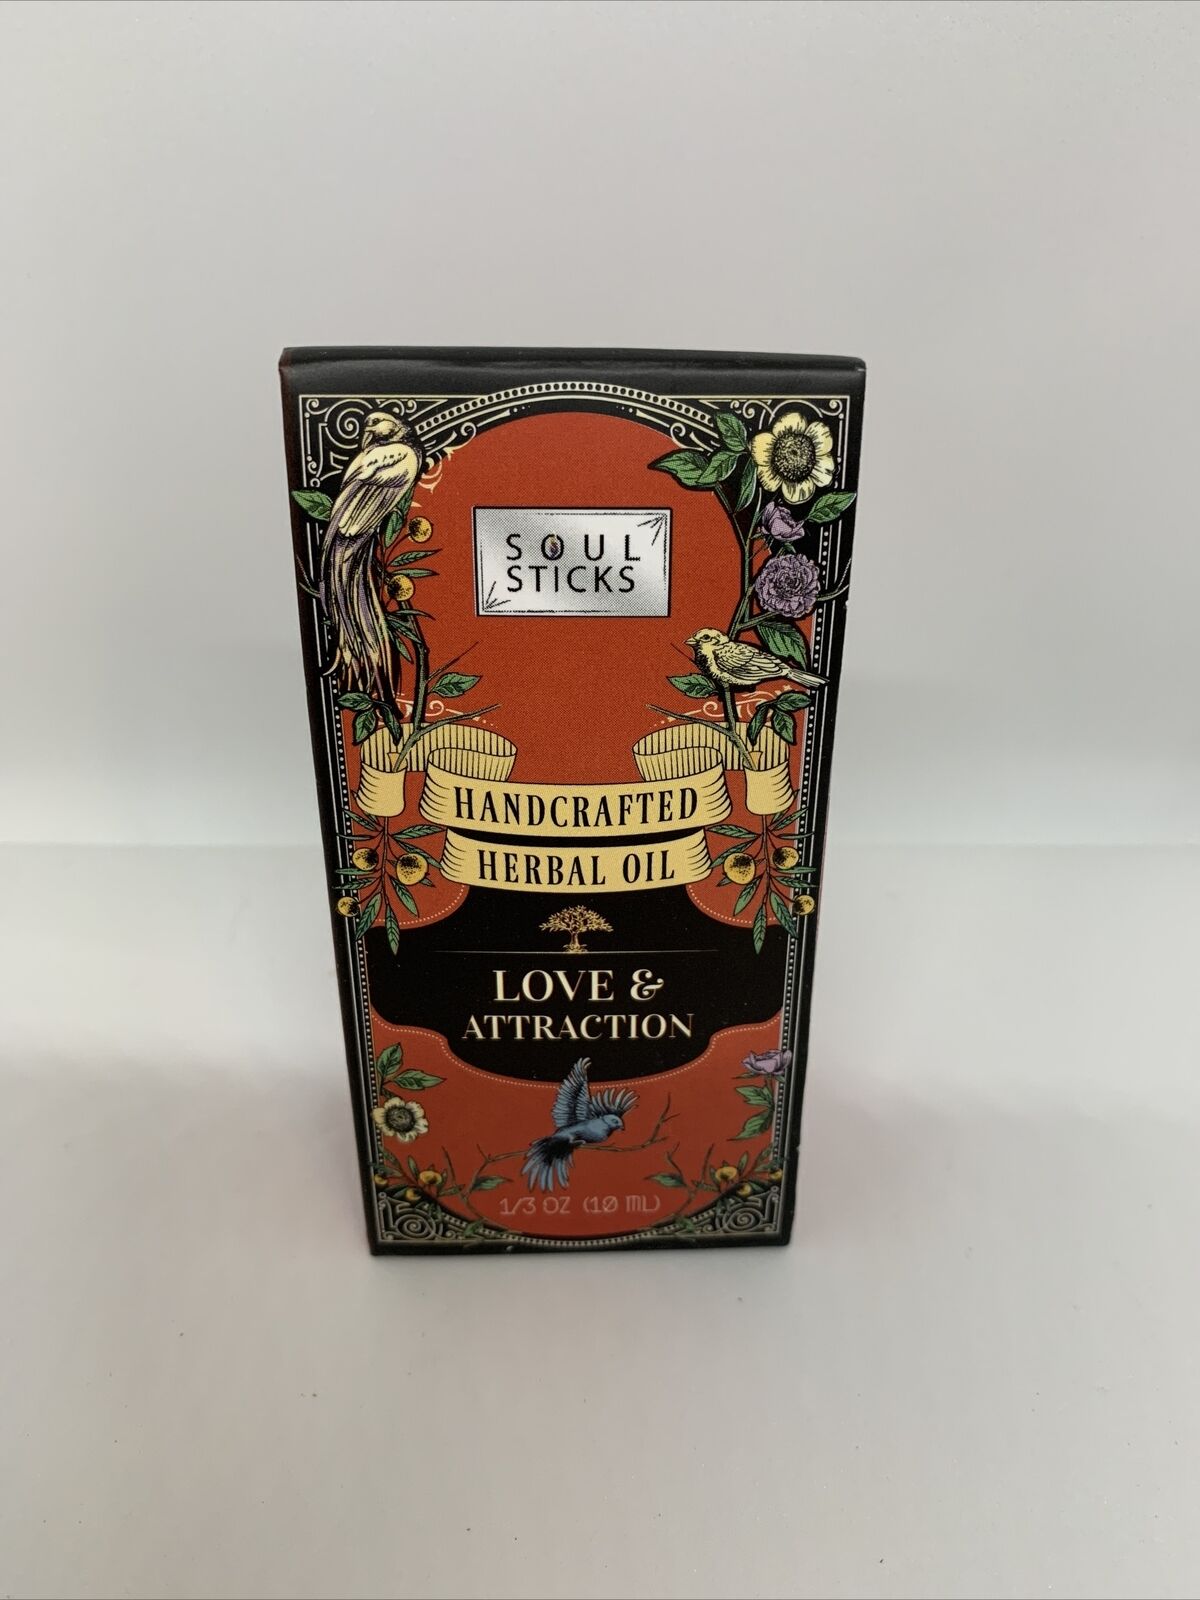 Soul Sticks Hand Crafted Herbal Oil ‘Love & Attraction’ For Rituals Made In Indi